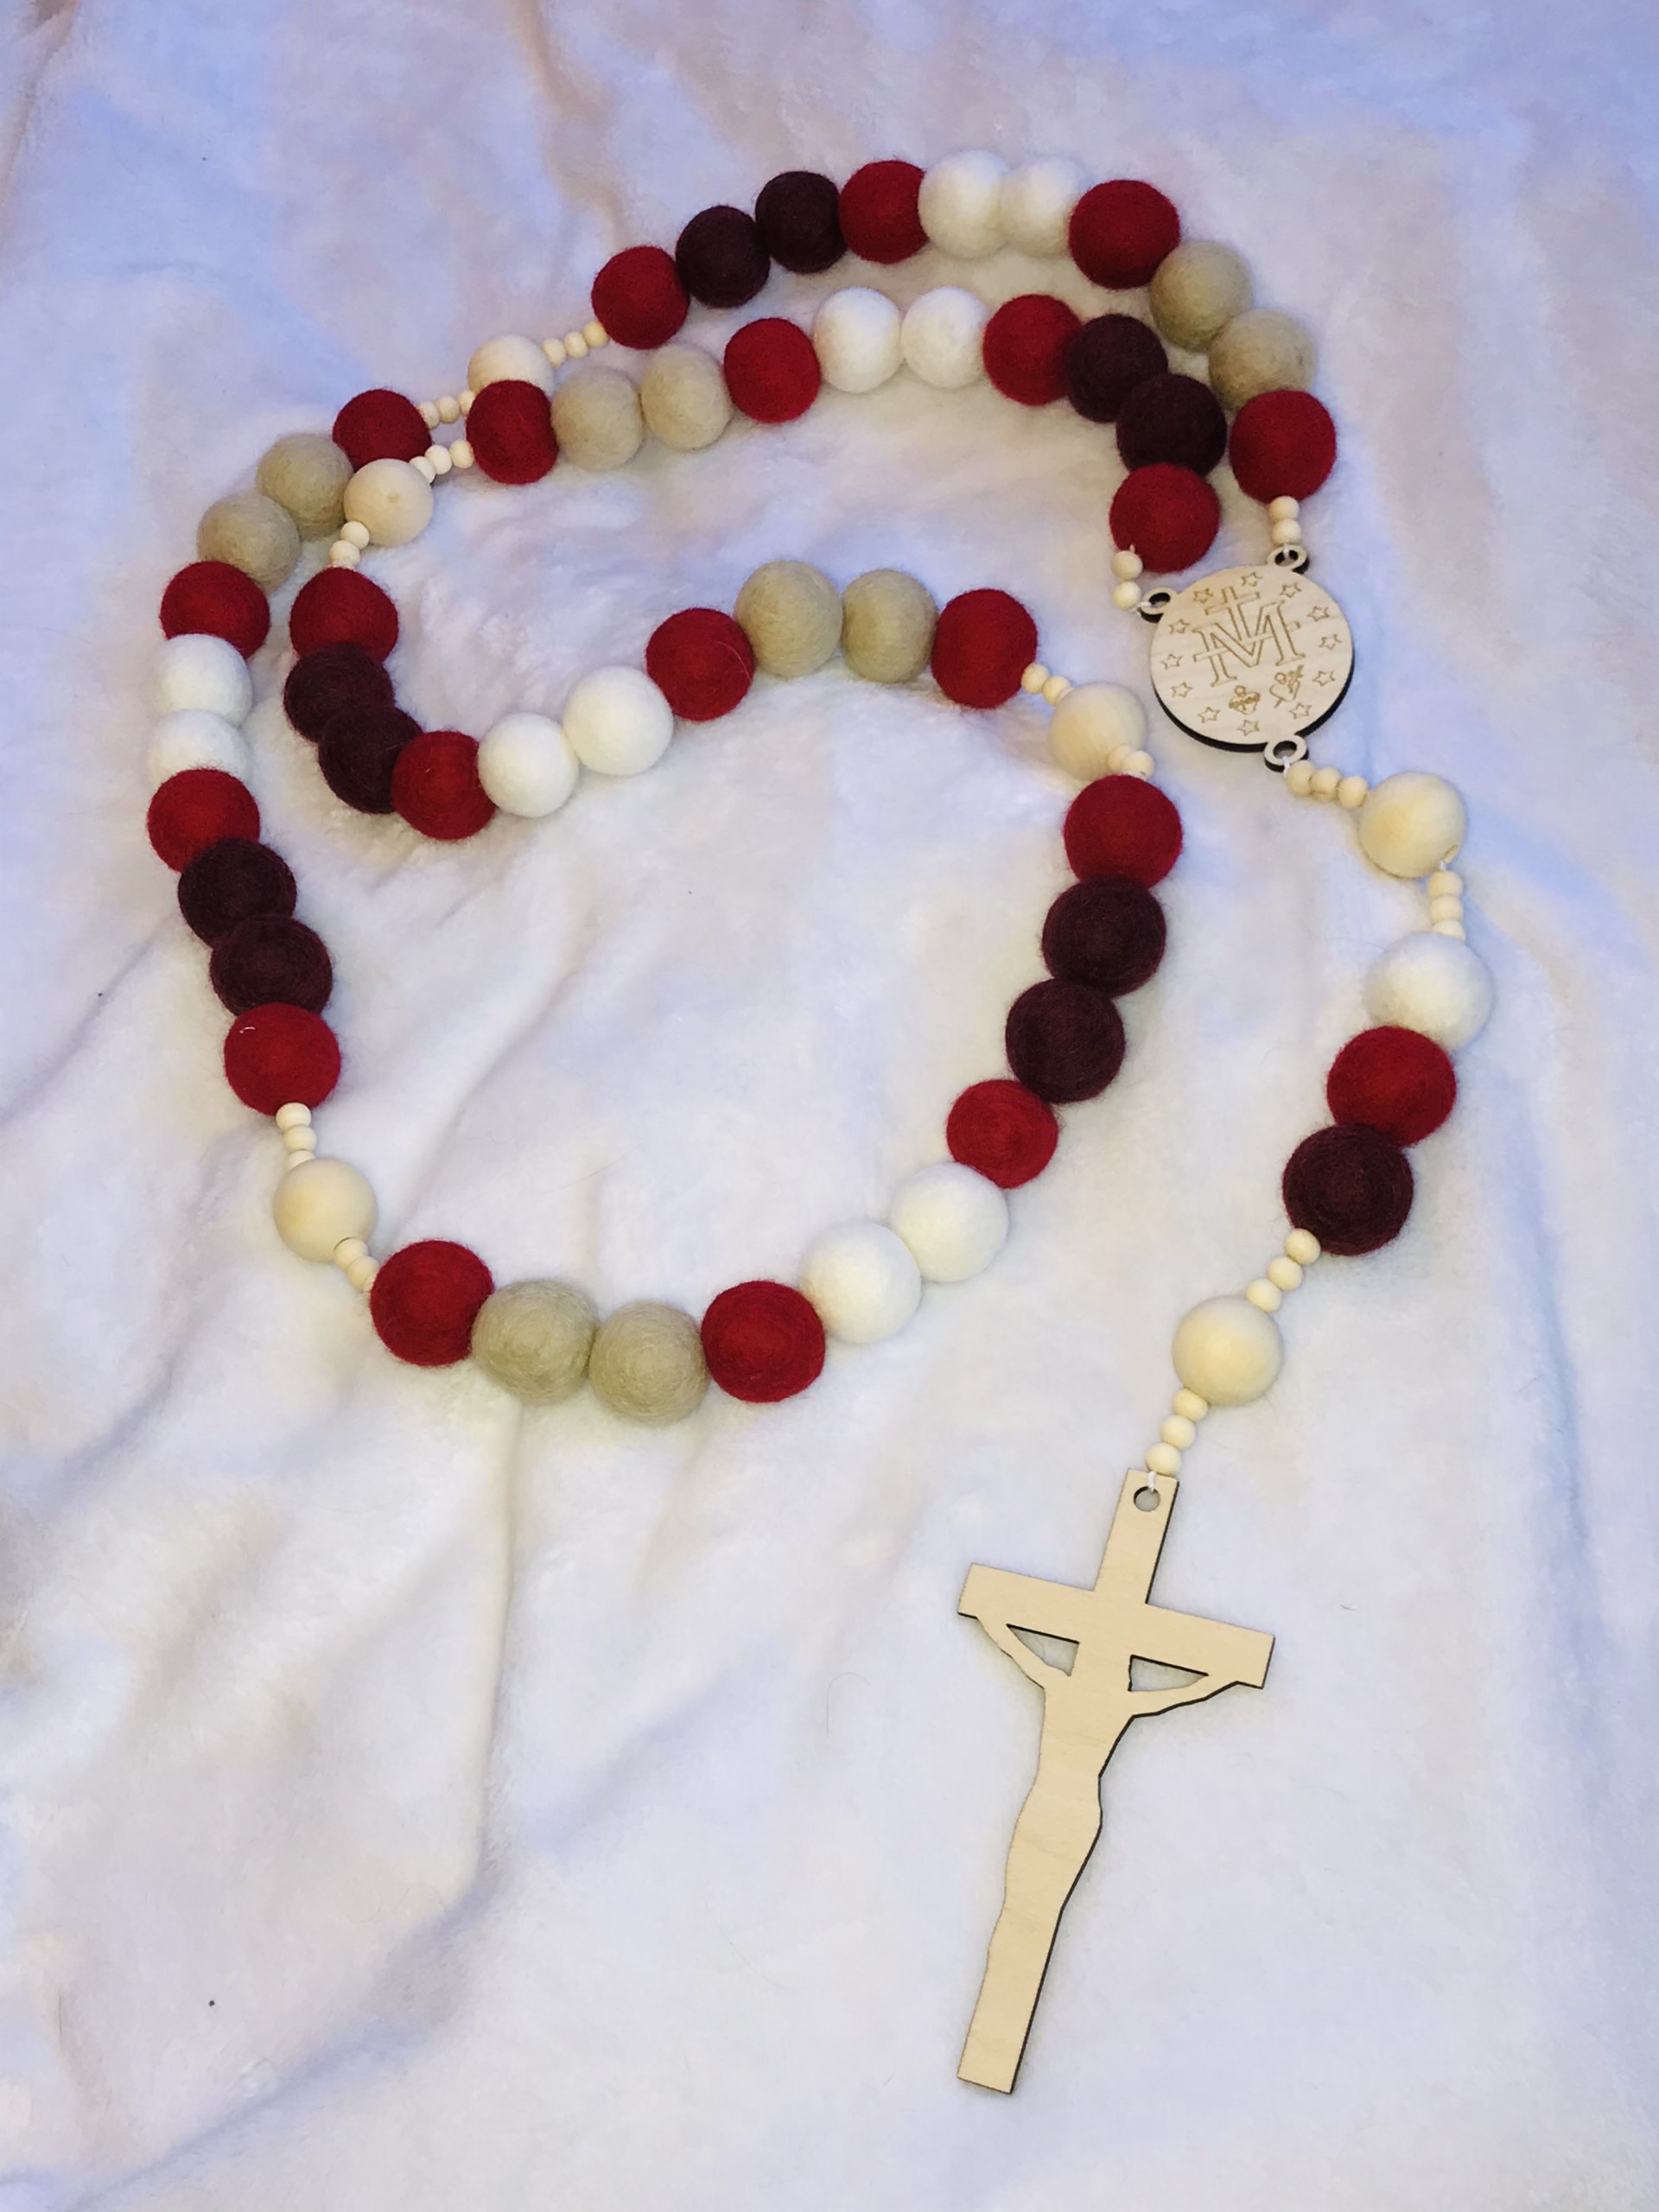 Look to Him and be Radiant: Divine Mercy Melty Beads